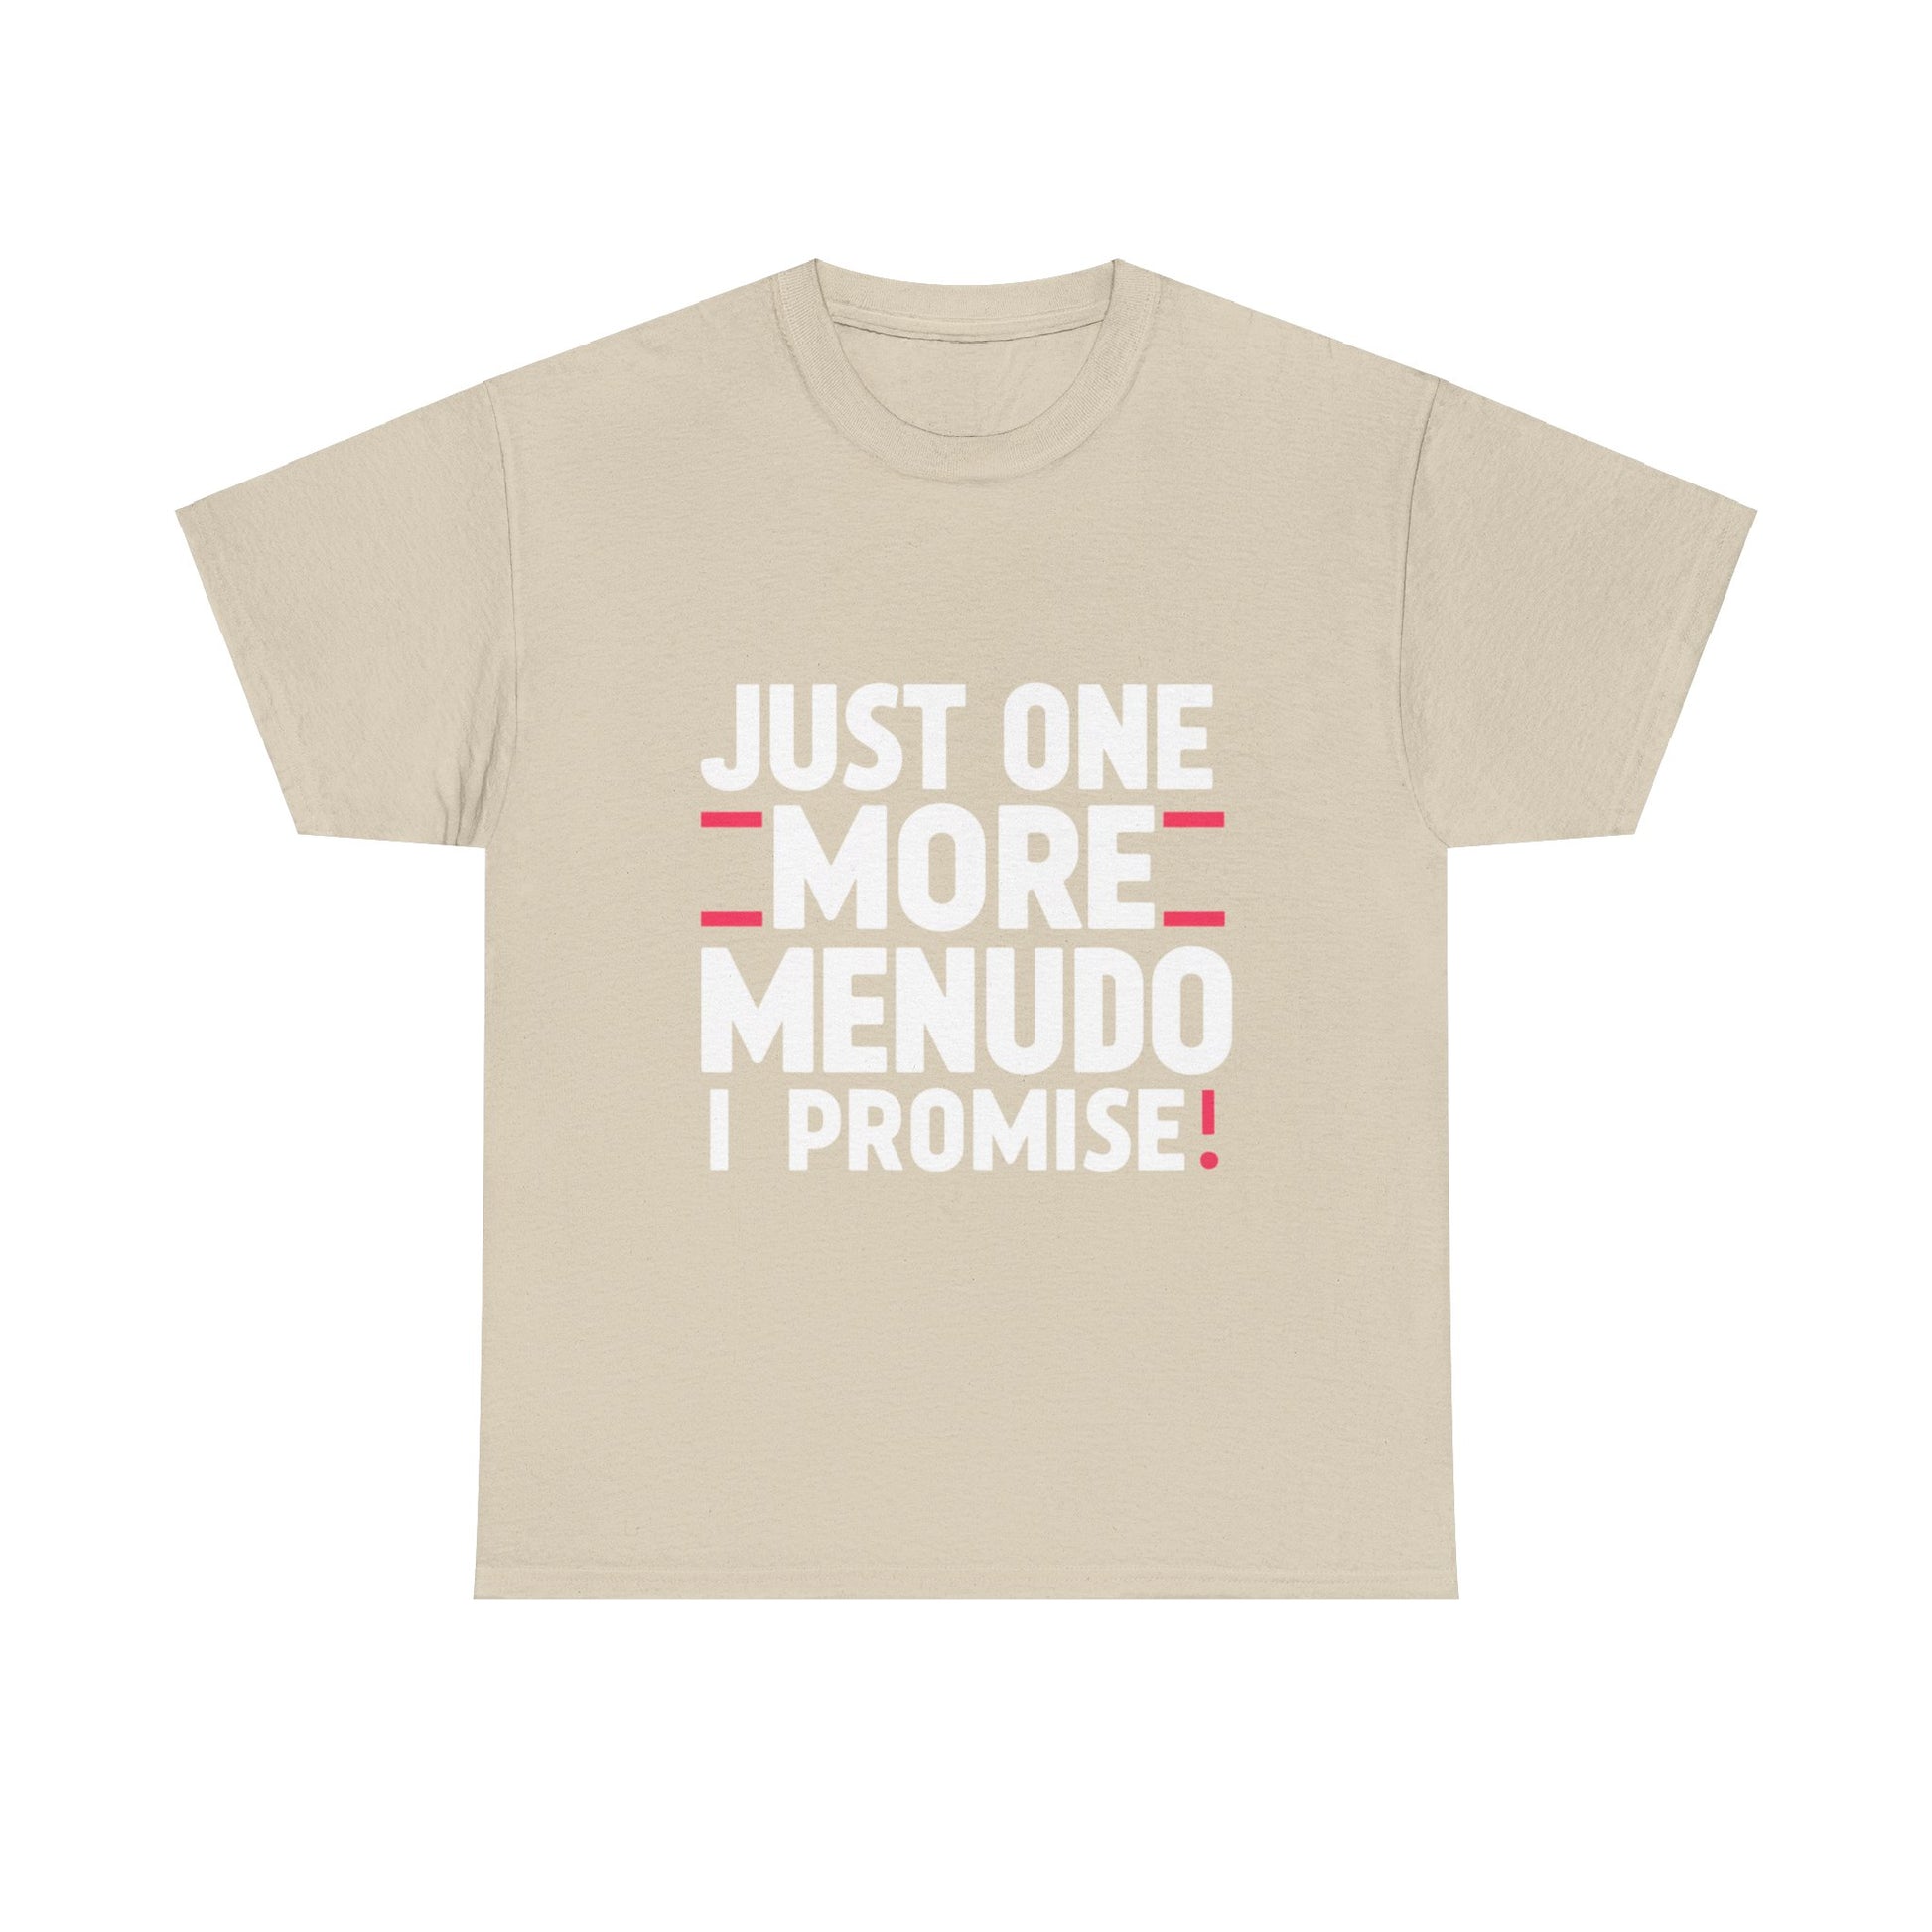 Just One More Menudo I Promise Mexican Food Graphic Unisex Heavy Cotton Tee Cotton Funny Humorous Graphic Soft Premium Unisex Men Women Sand T-shirt Birthday Gift-8